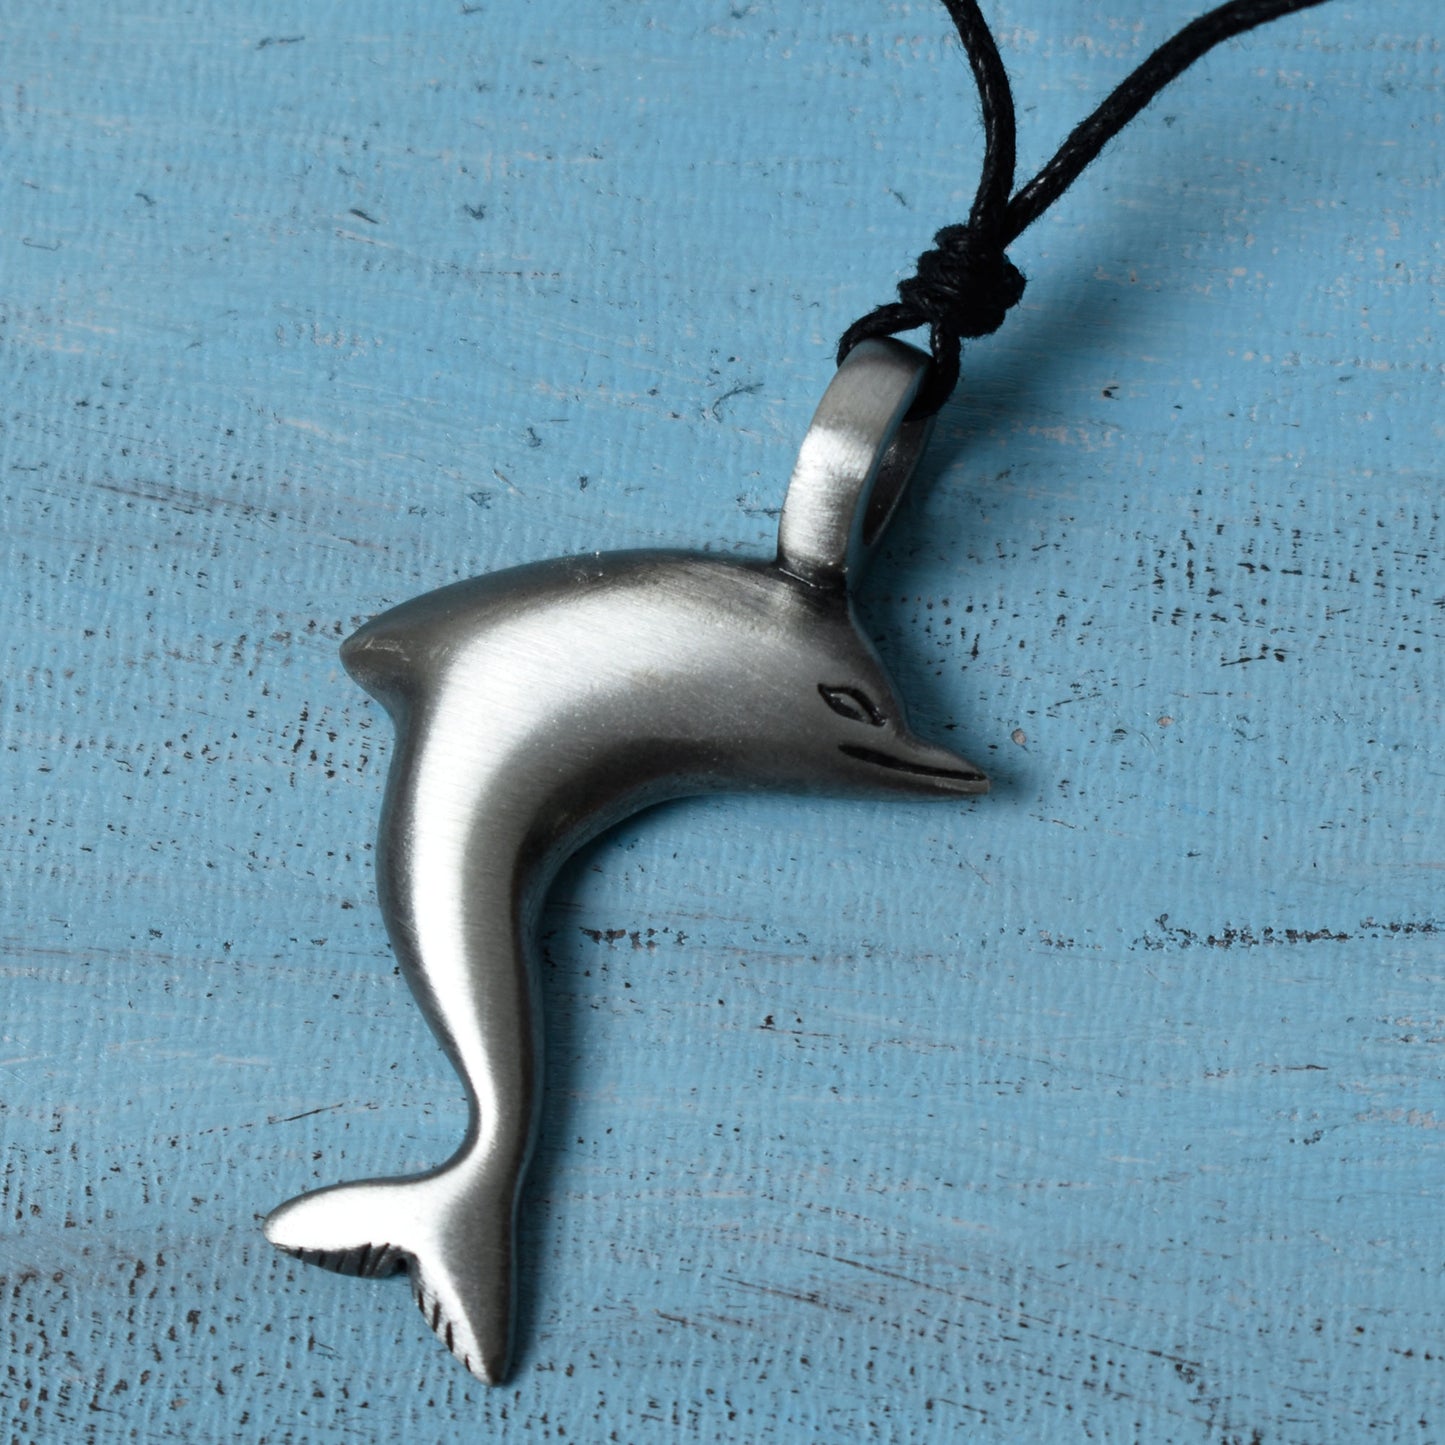 Stylist Dolphin Silver Pewter Charm Necklace Pendant Jewelry